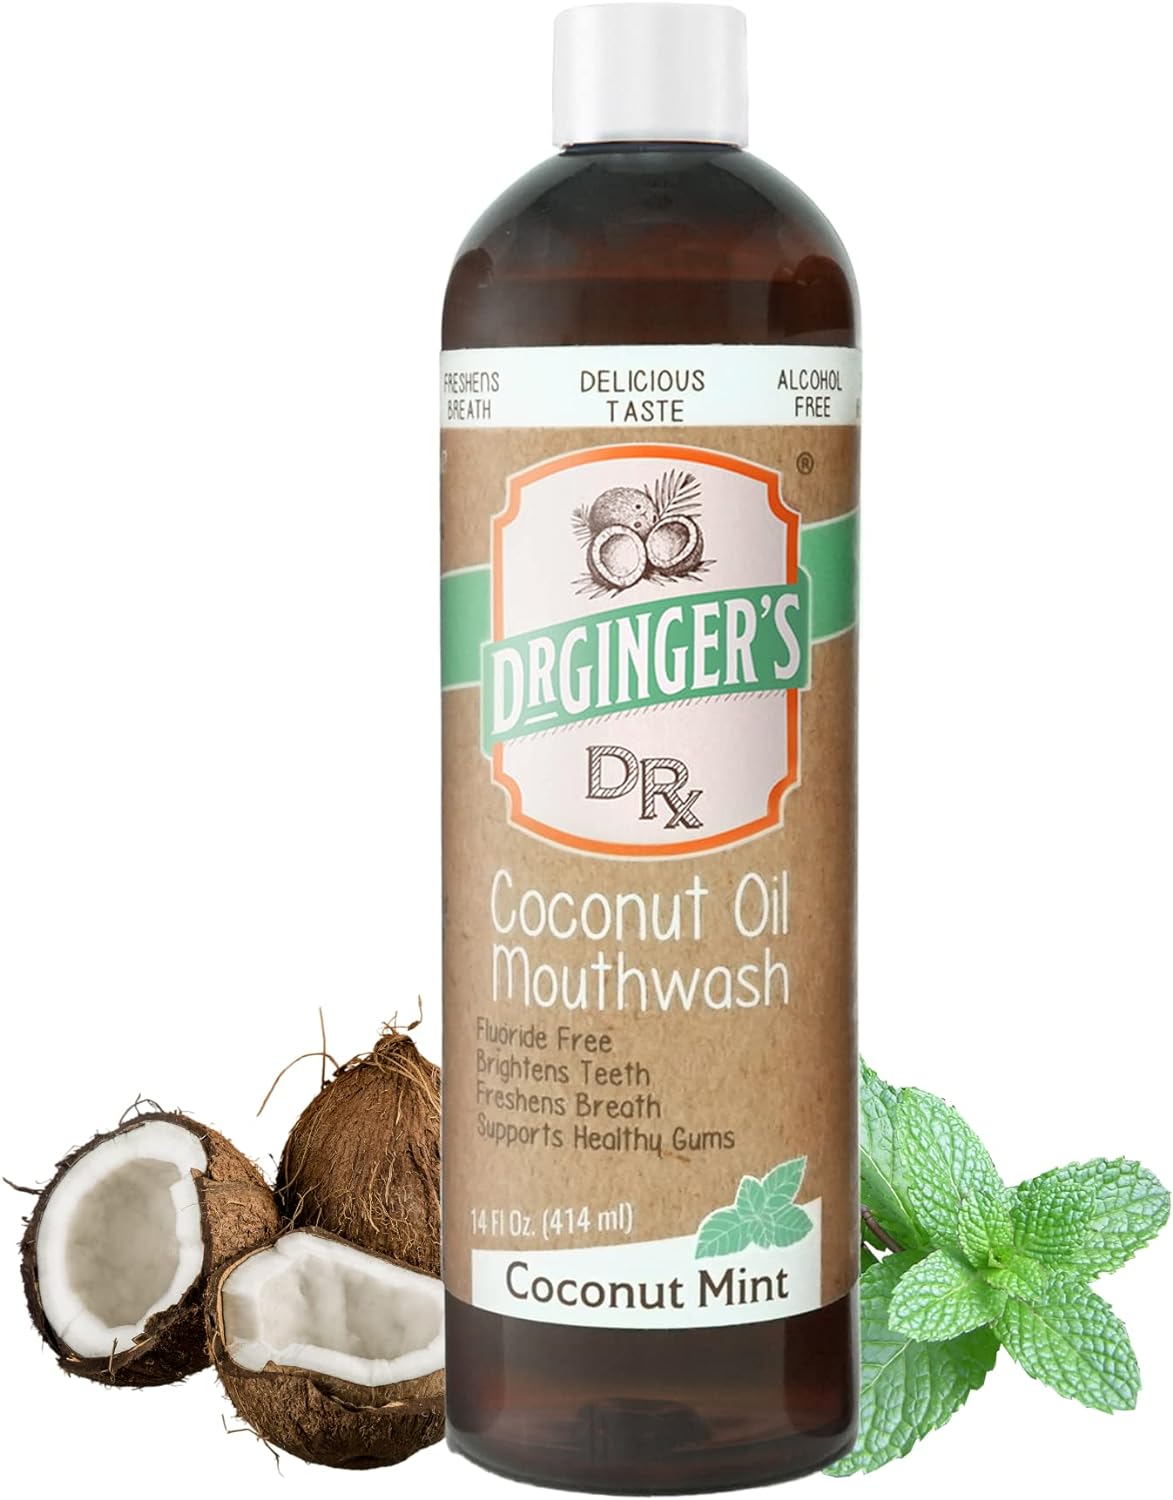 Dr. Gingers Coconut Oil Pulling Mouthwash, All-Natural Oil Pulling  Xylitol to Target Bad Breath, Support Tongue and Gum Health and Brighten Teeth, Fluoride-Free, Coconut Mint Flavor, 14fl oz, 1ct